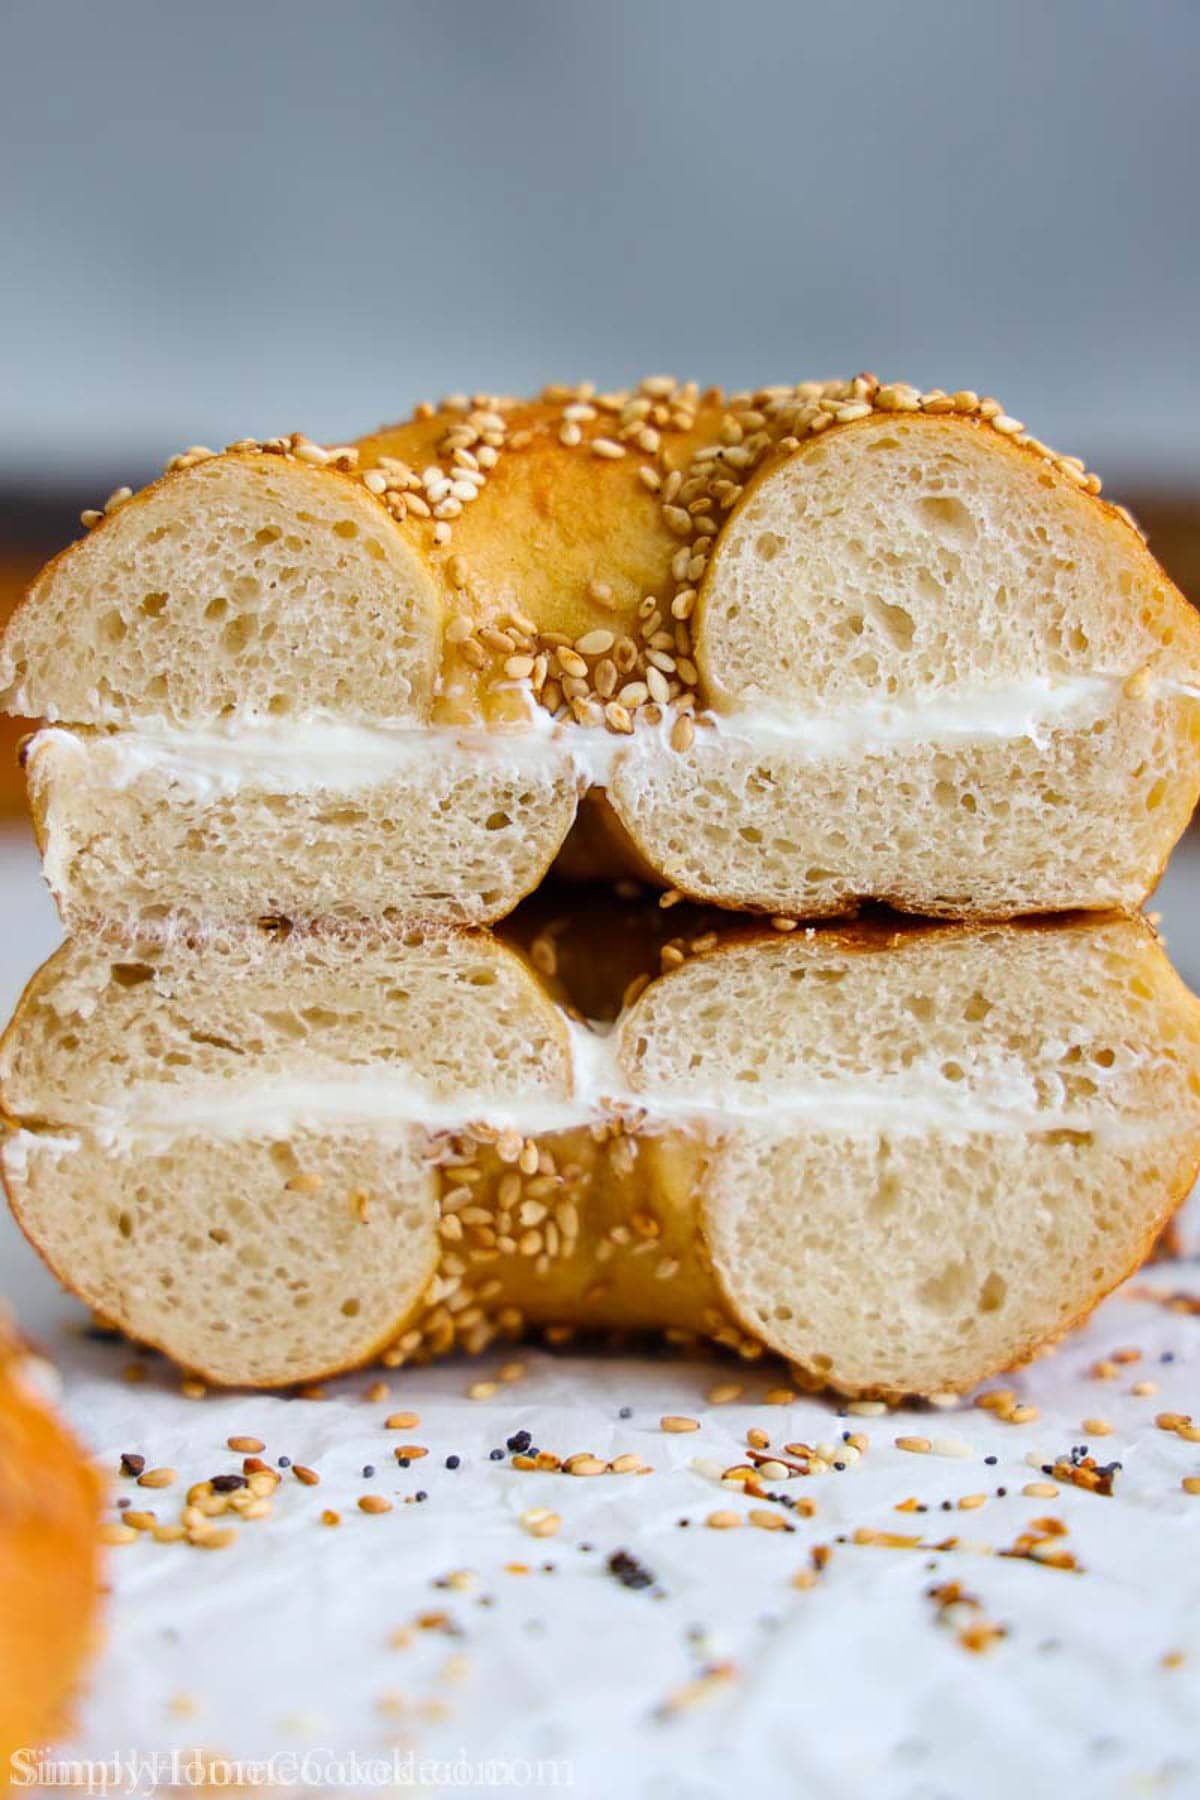 New York Bagels sliced in half with cream cheese